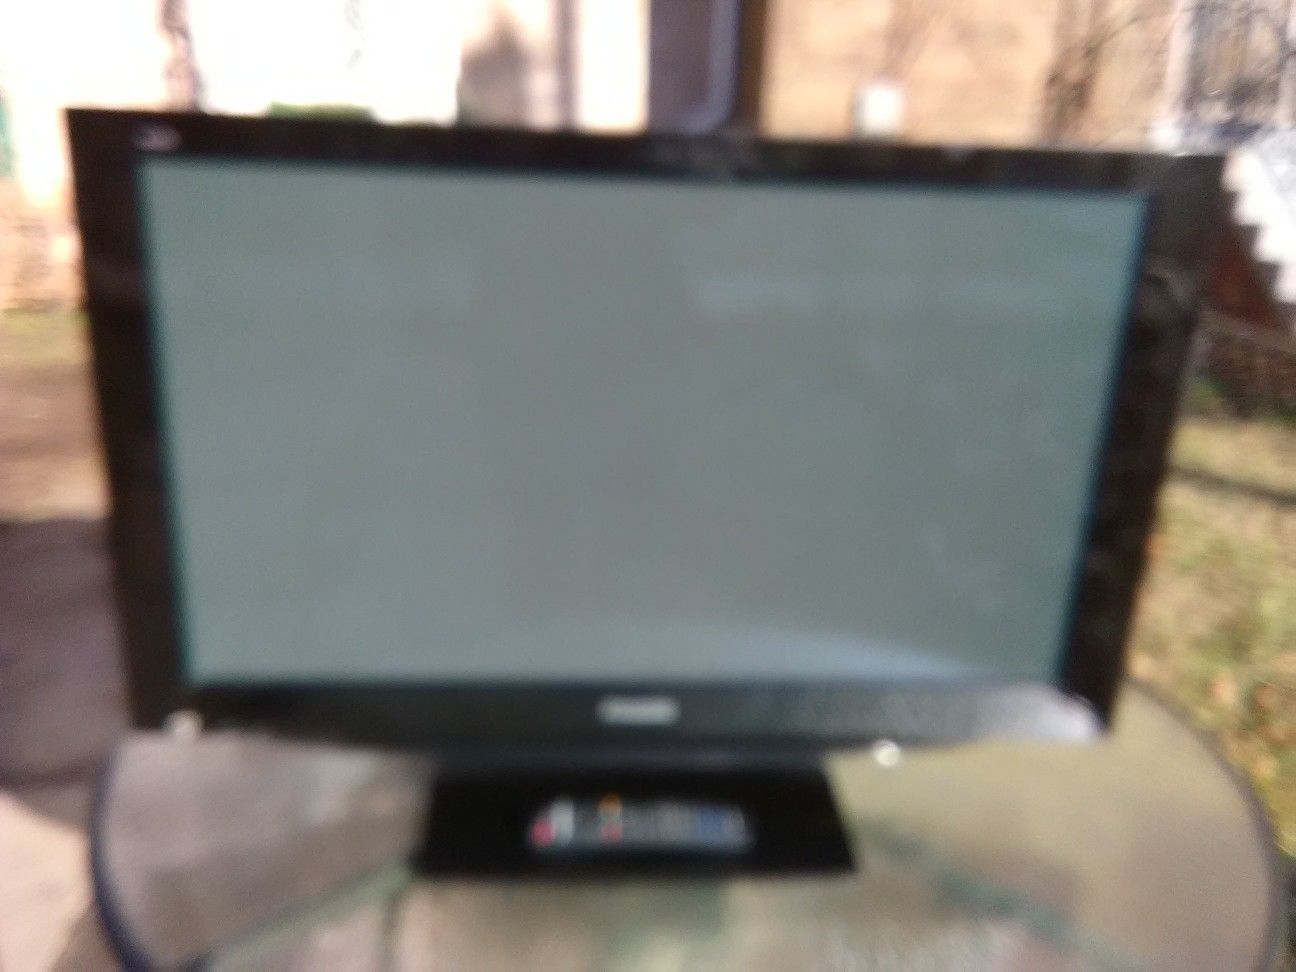 Black Panasonic 42 inch TV with remote control and HDMI port